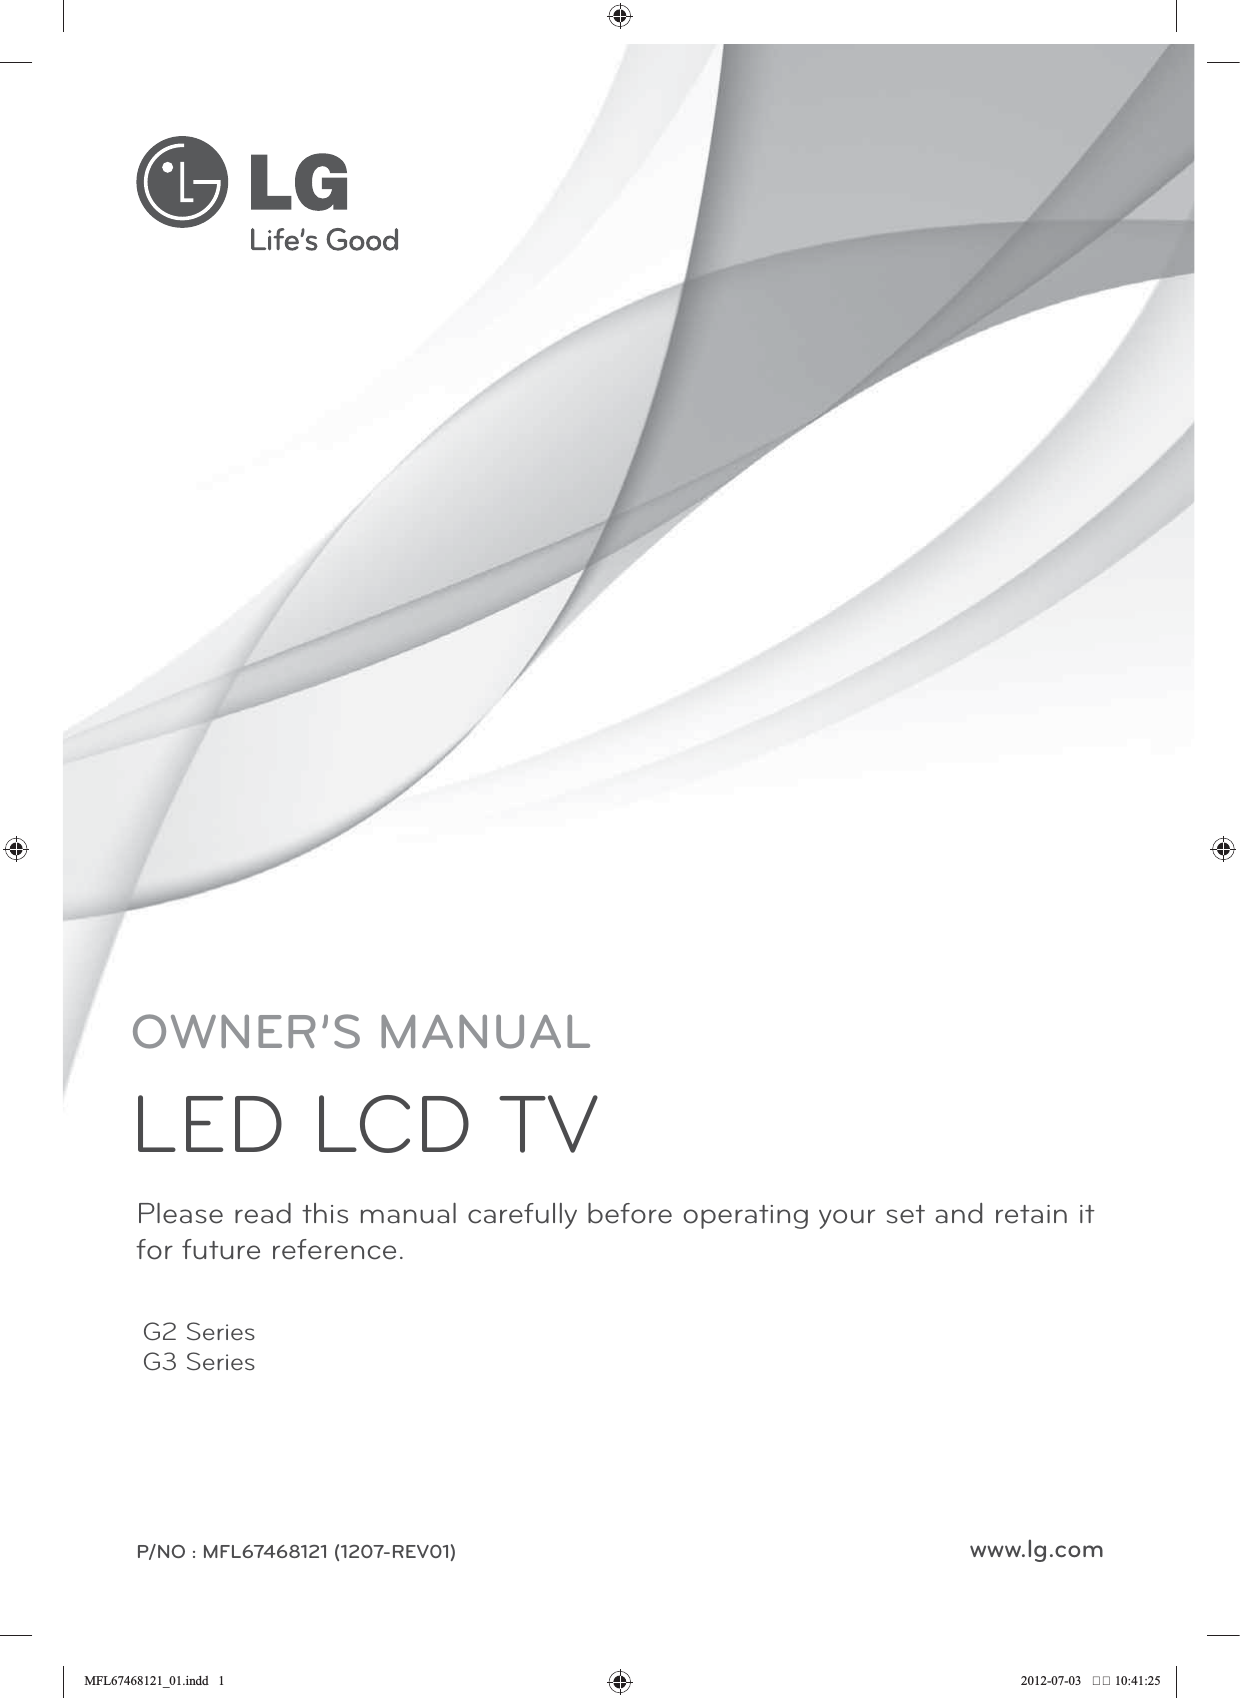 www.lg.comPlease read this manual carefully before operating your set and retain it for future reference.P/NO : MFL67468121 (1207-REV01)OWNER’S MANUALLED LCD TVG2 SeriesG3 Series0)/BLQGG 